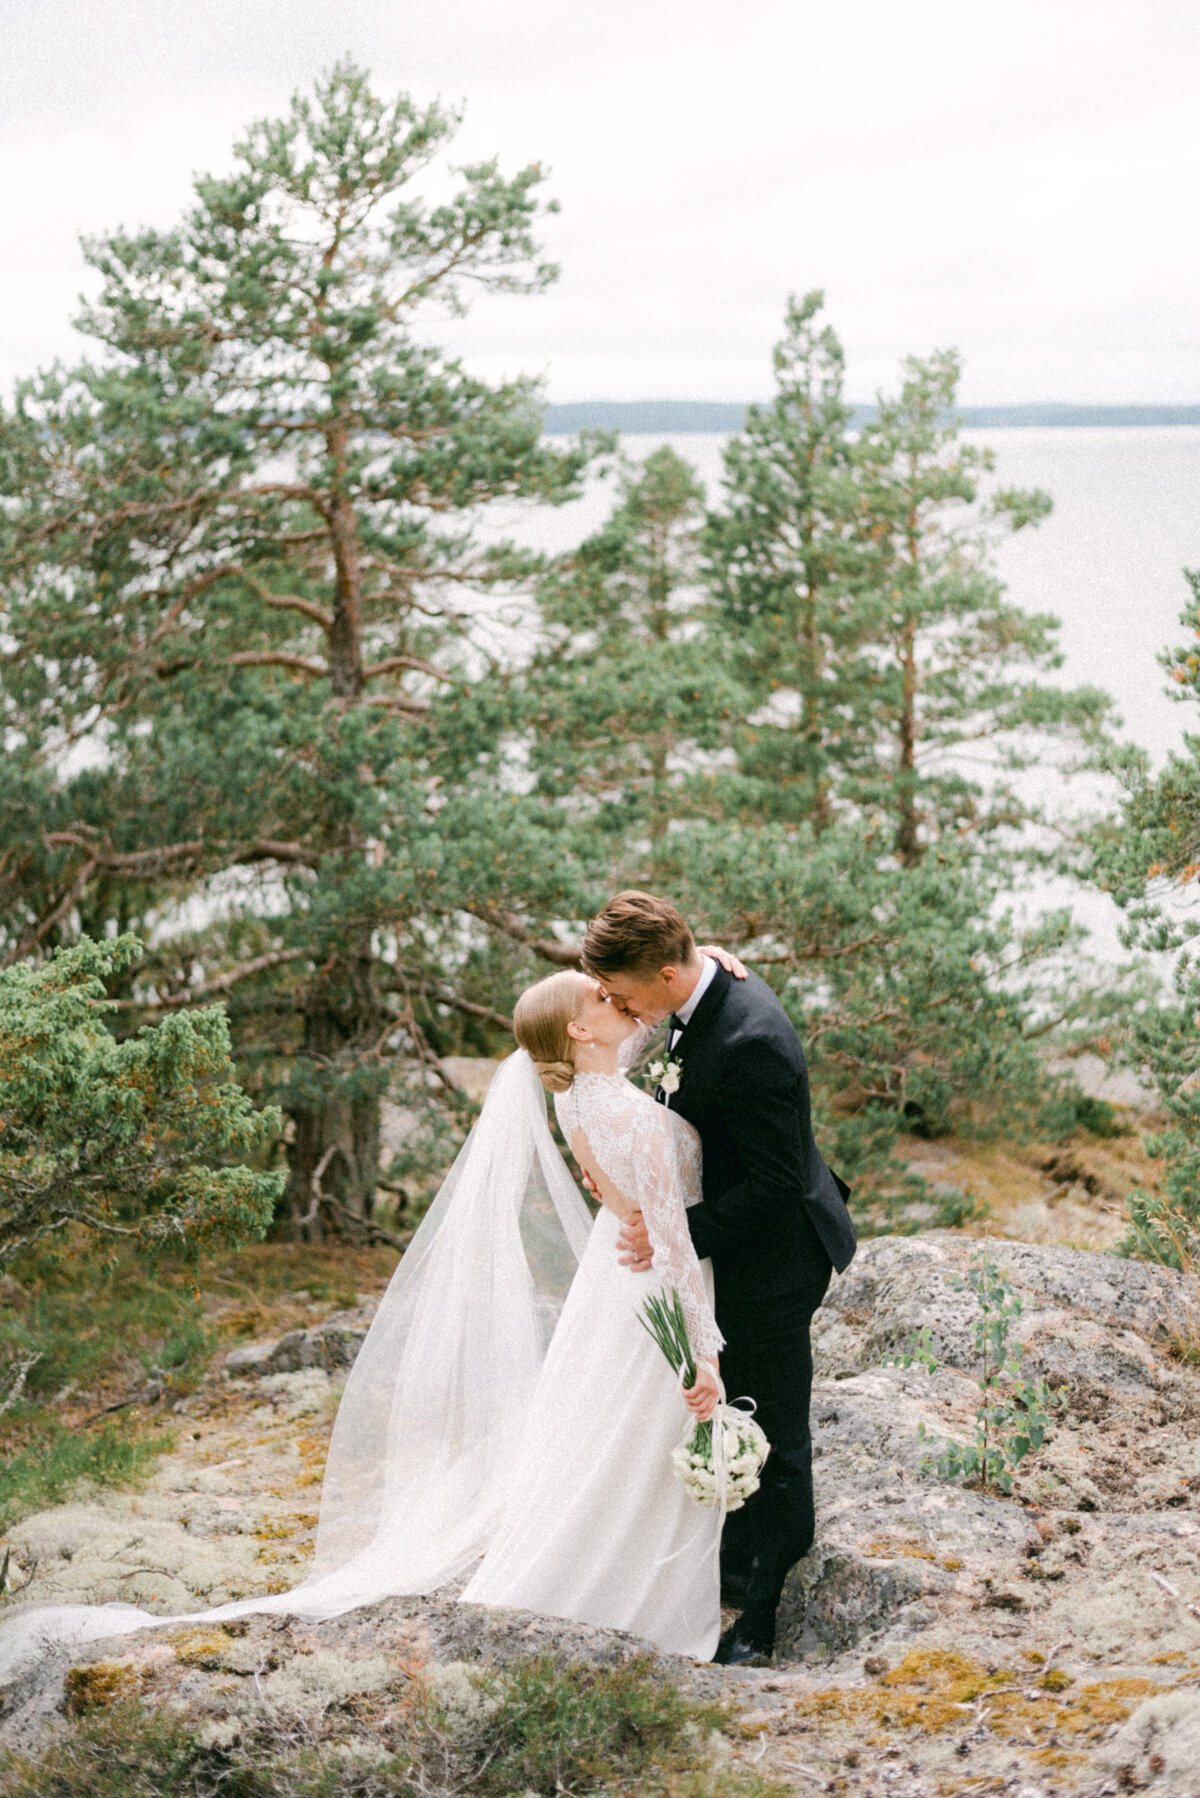 A wedding couple is kissing in the forest by the sea in a photograph taken by wedding photographer Hannika Gabrielsson in Finland.